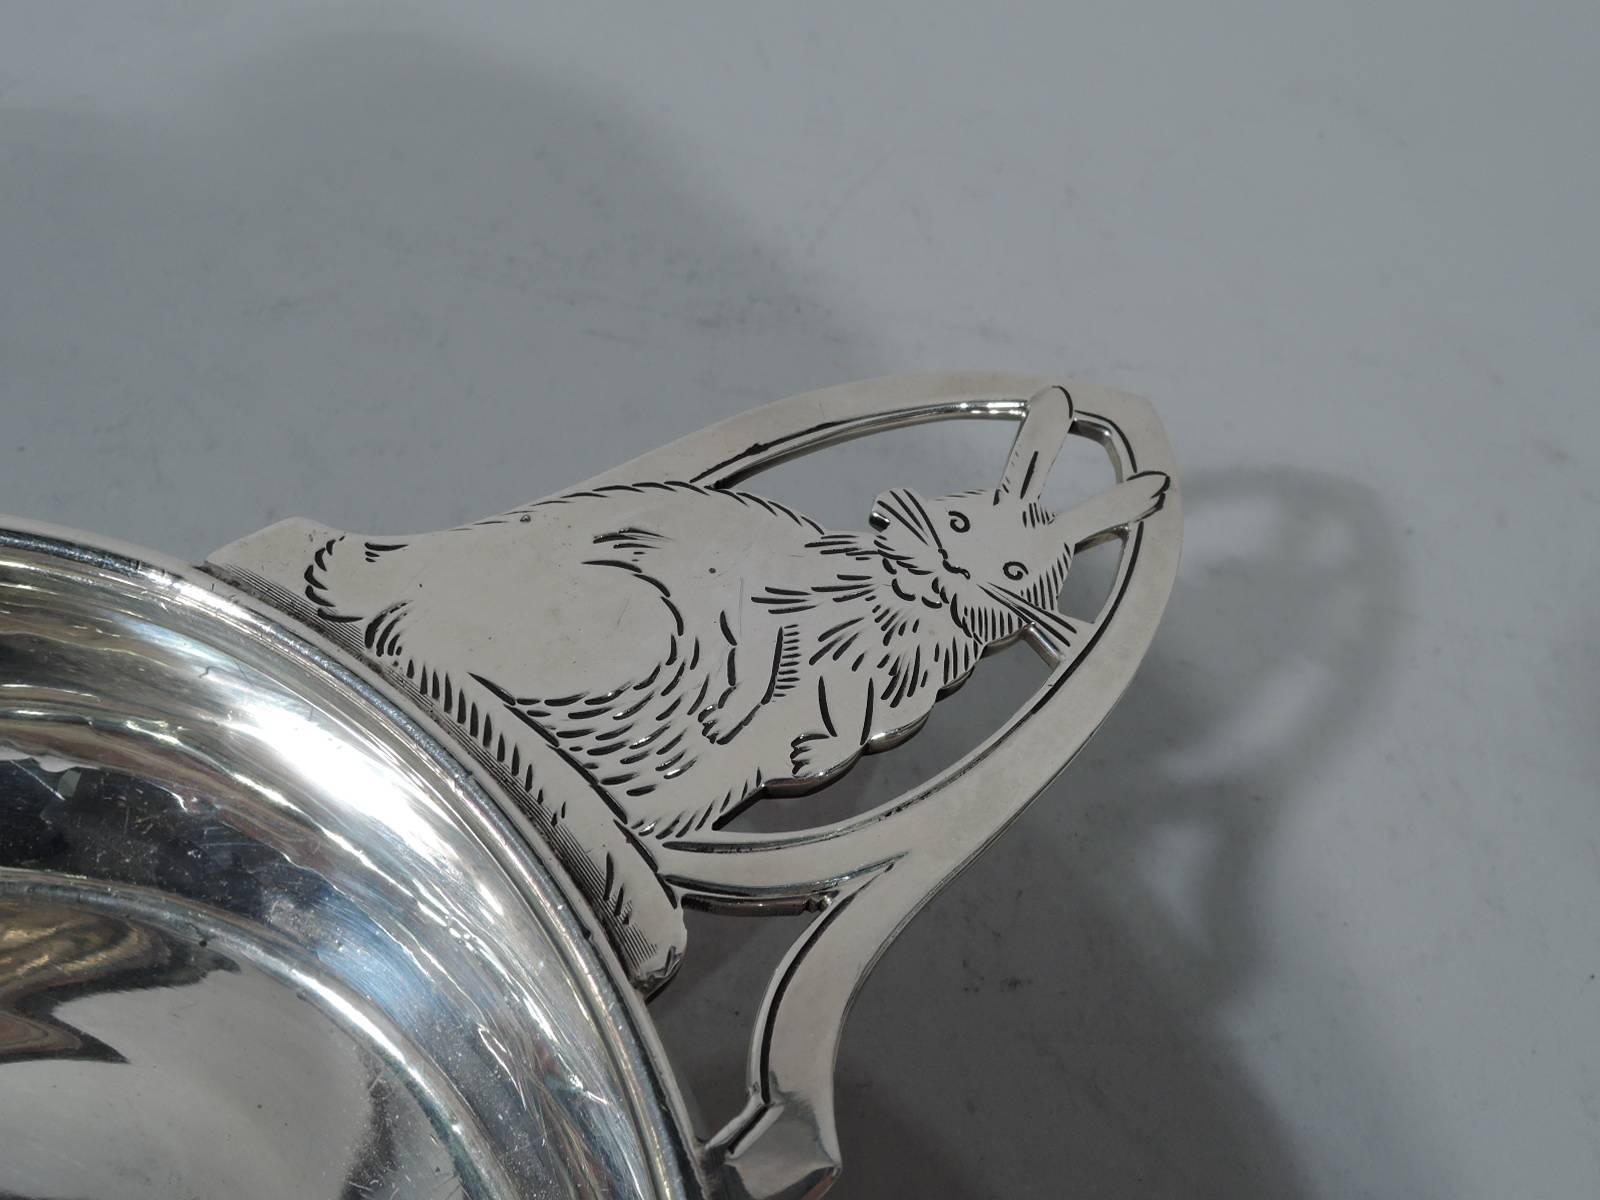 Sterling silver porringer. Made by Watrous (a division of International) in Wallingford, Conn., ca 1930. Curved sides and open handle inhabited by sweet rabbit: Bunny sits on haunches with limp forearms and erect pointy ears. Engraving brings out